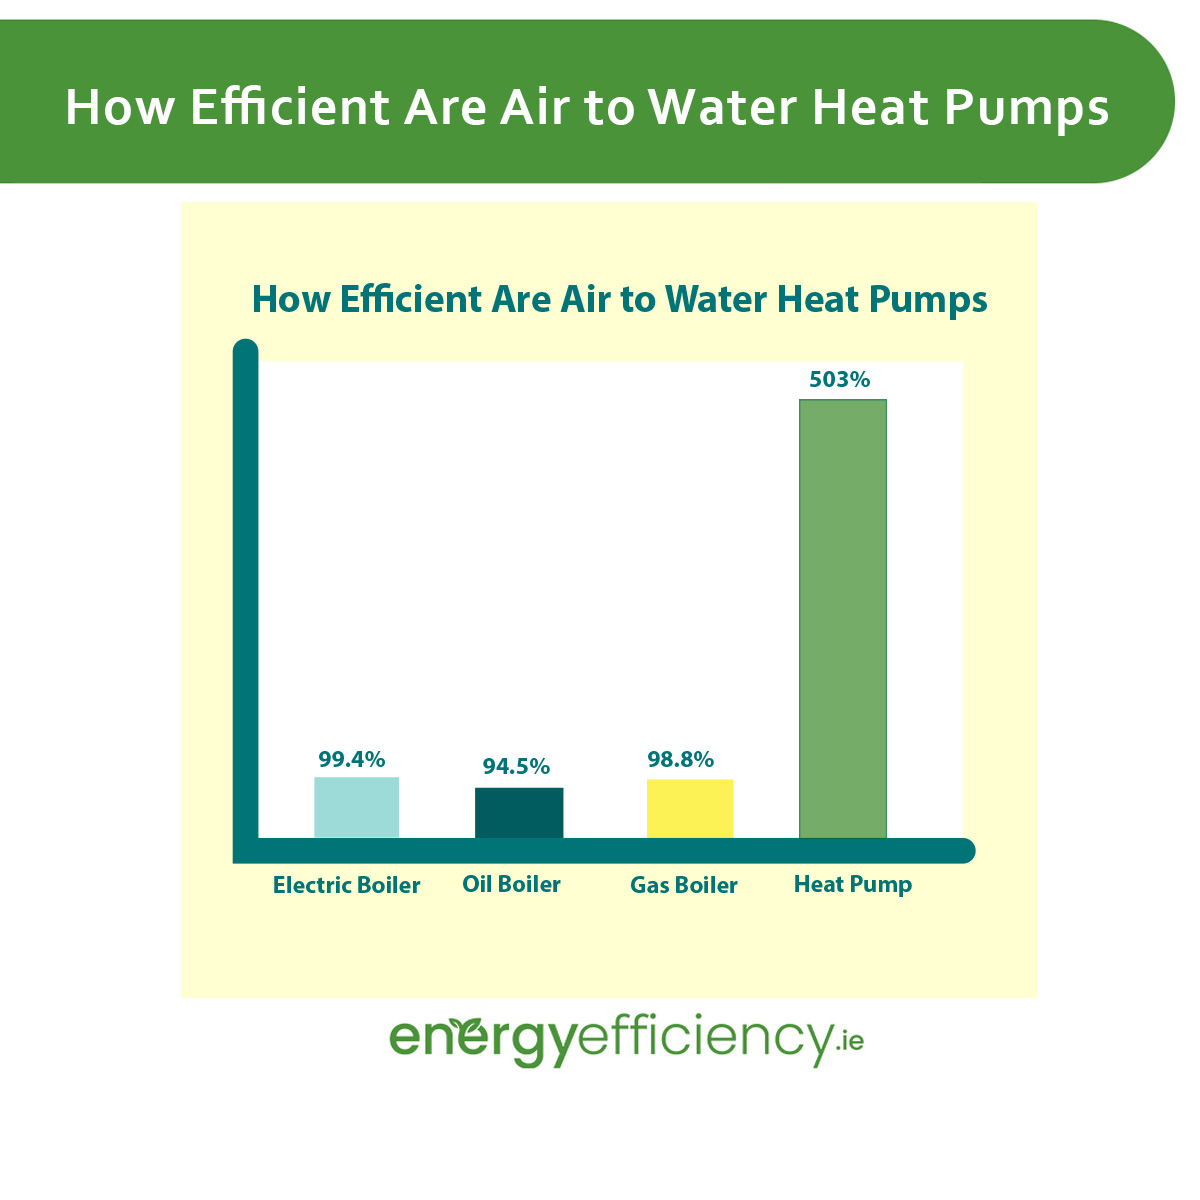 How Efficient Are Air to Water Heat Pumps